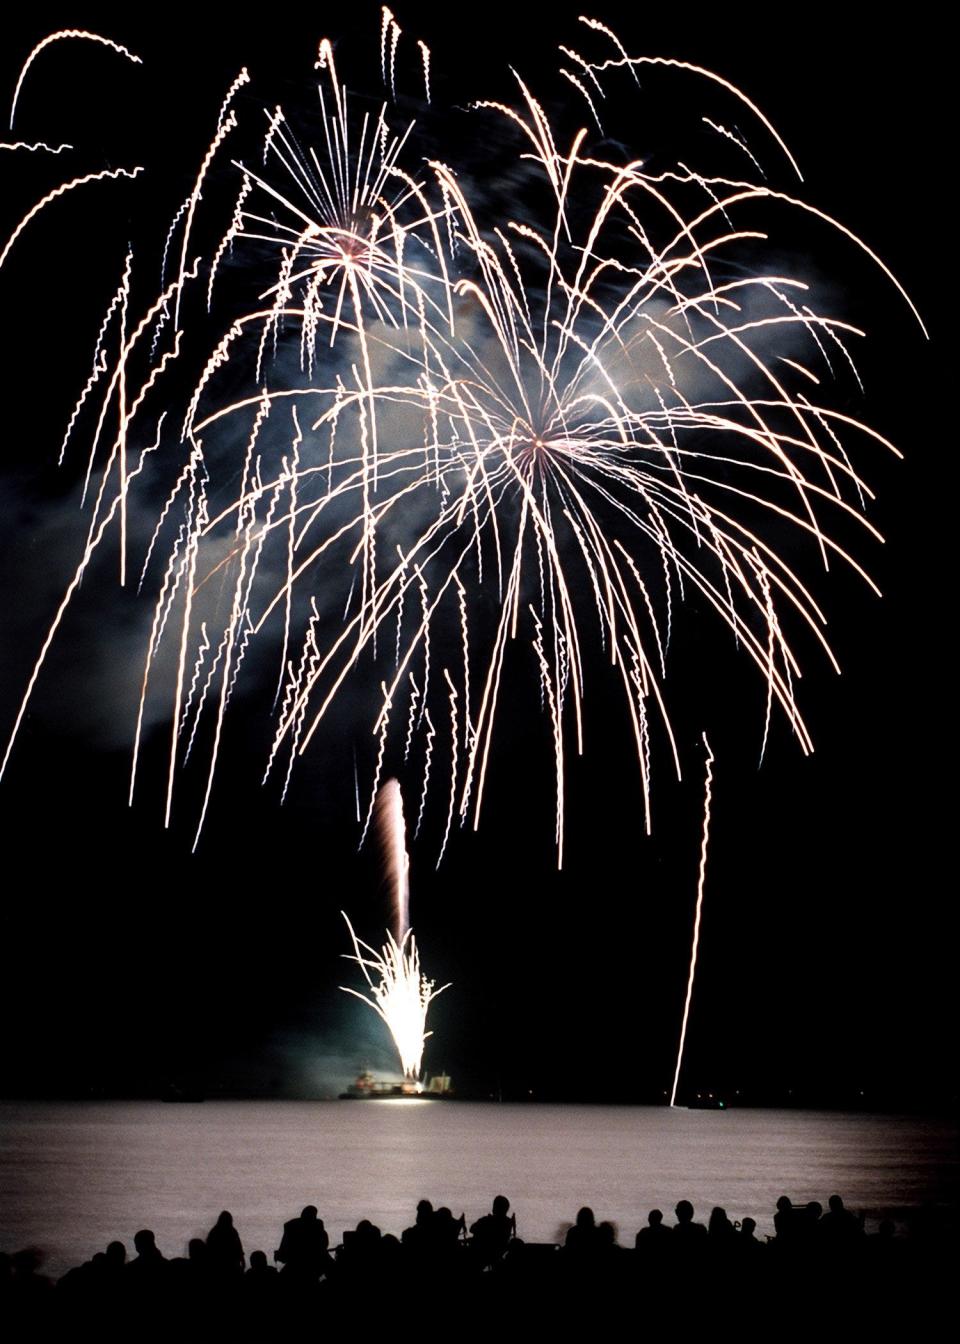 The 4th of July Celebration will feature fireworks by Zambelli Fireworks.